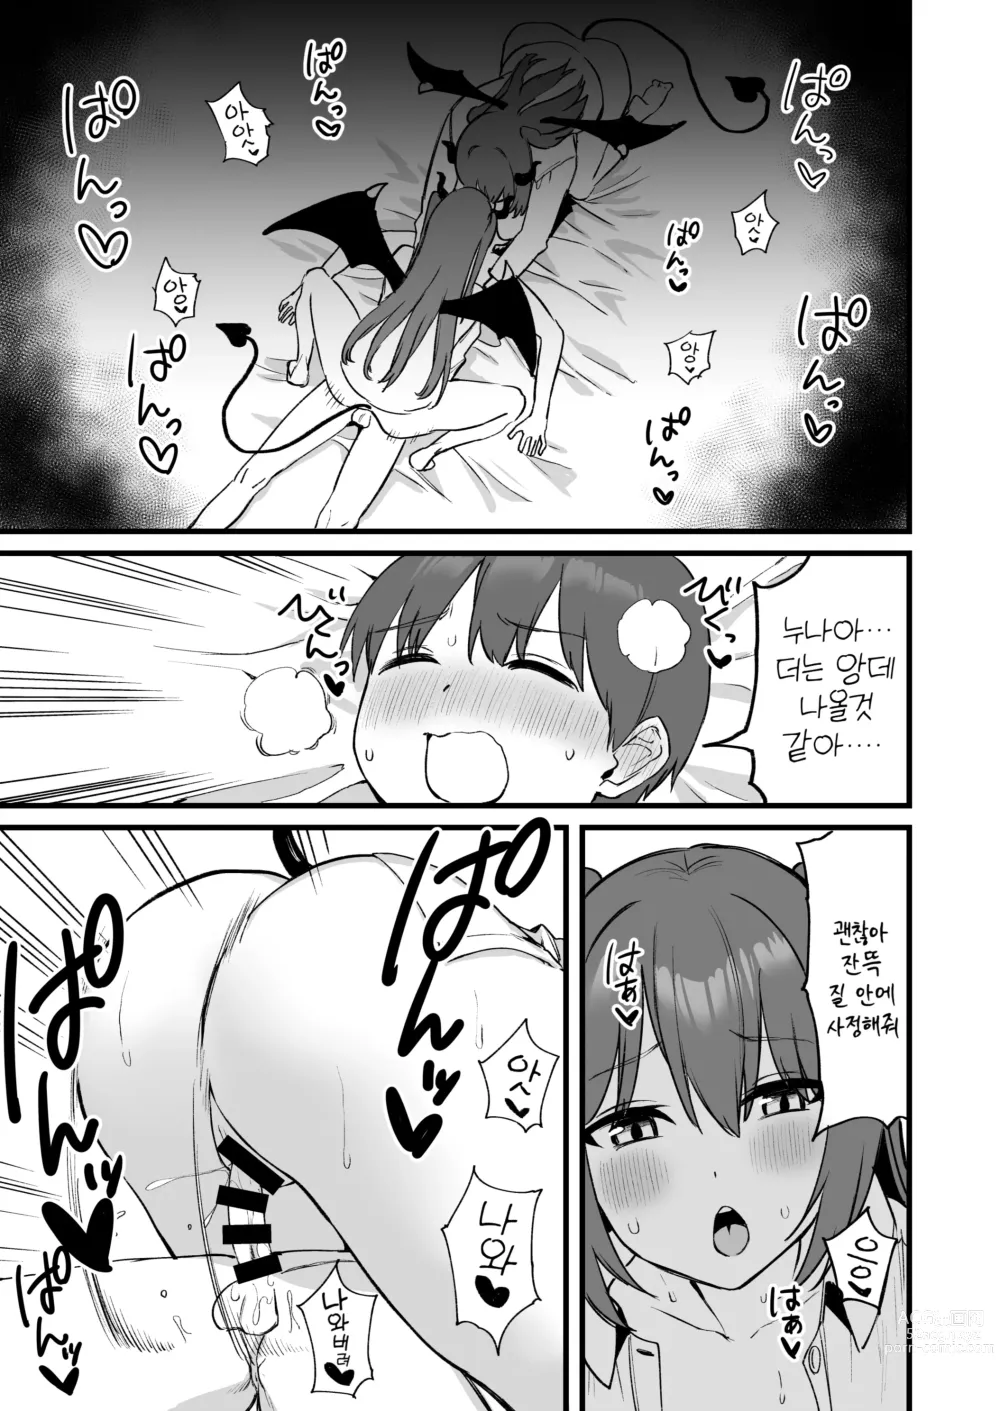 Page 53 of doujinshi 누나는 서큐버스!?